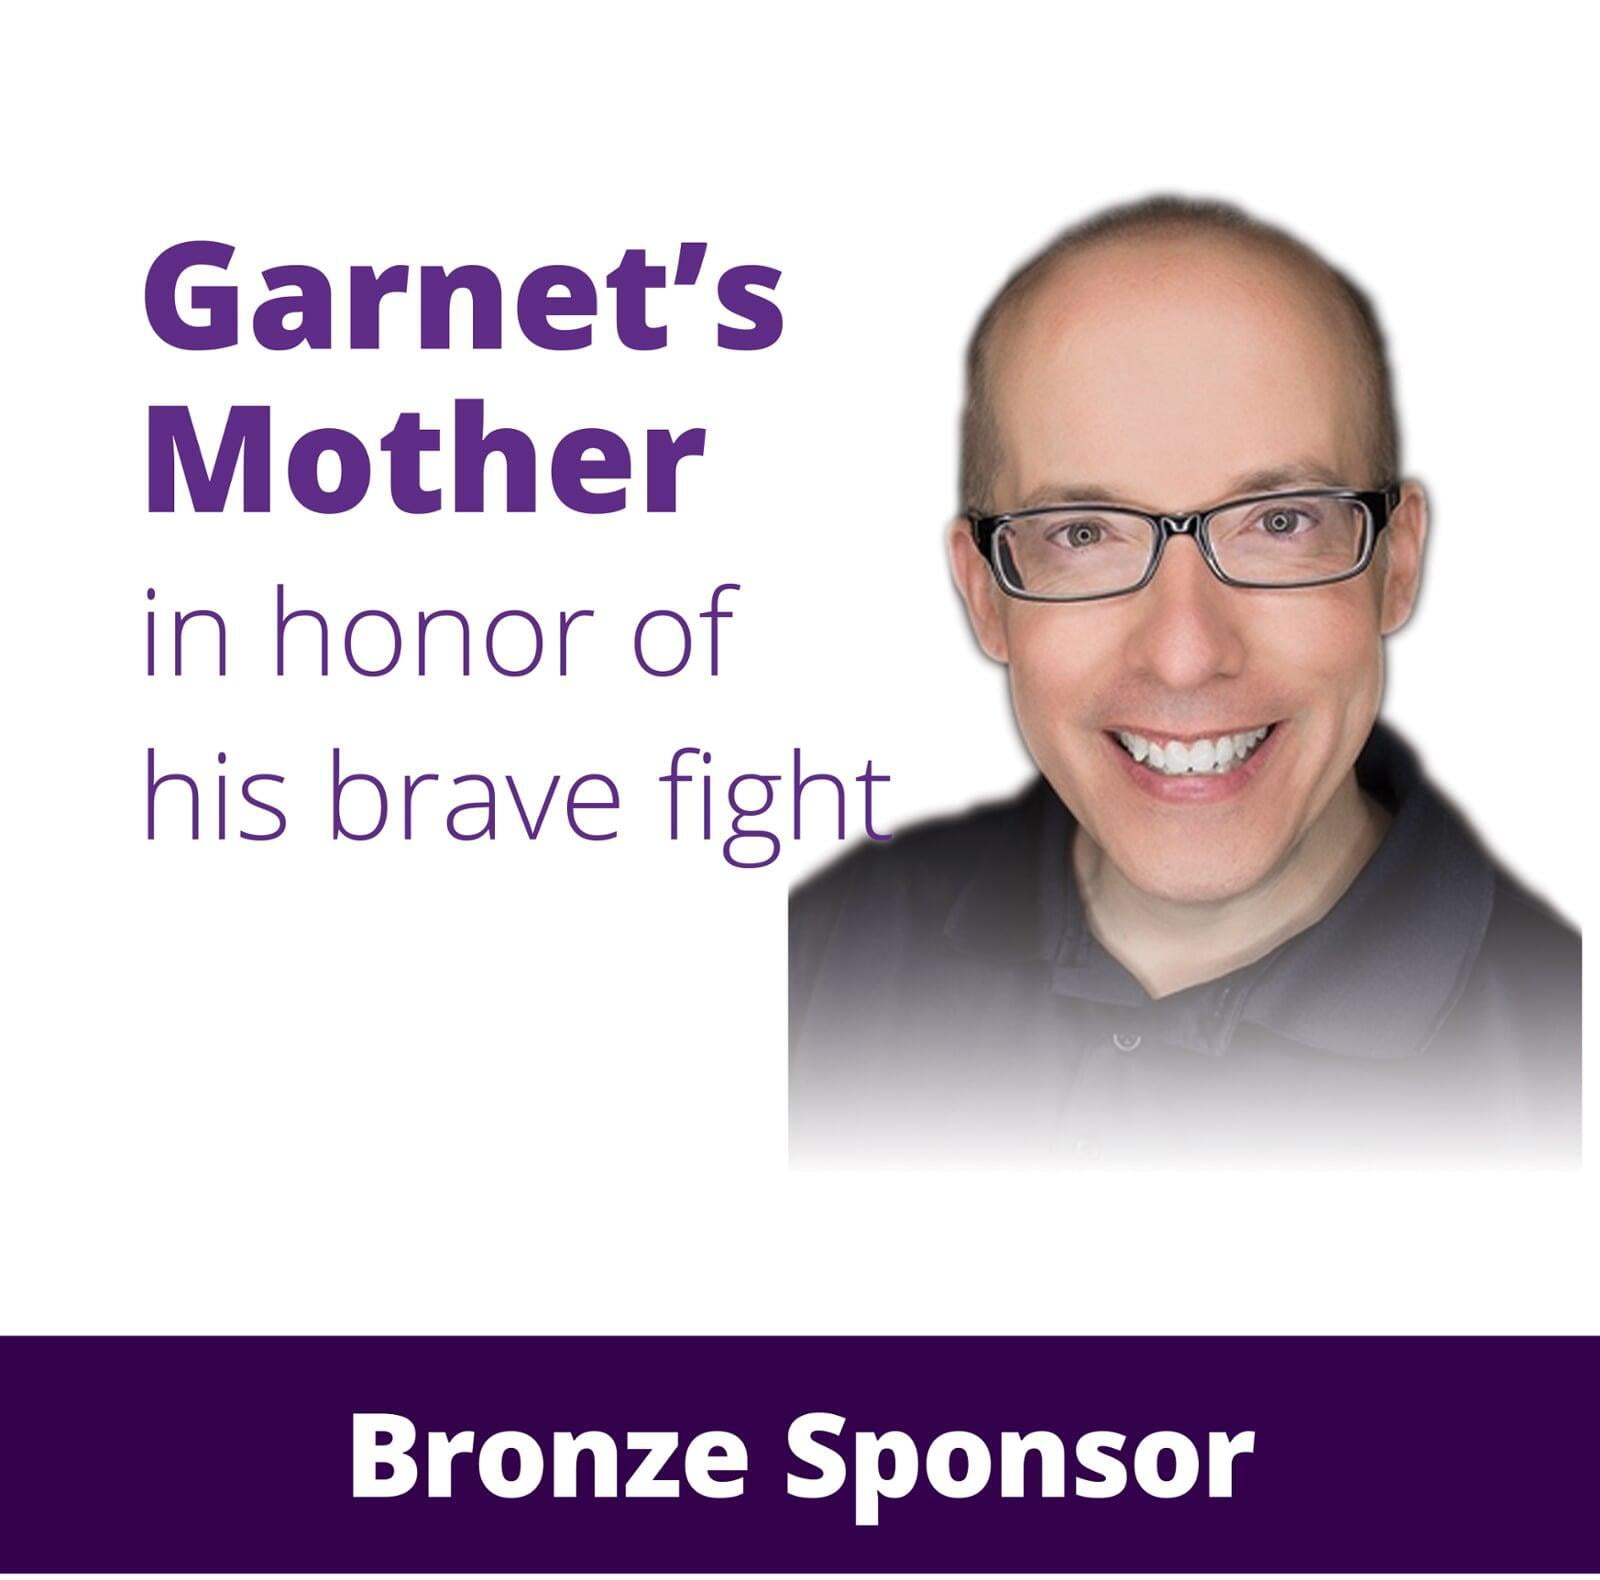 Garnet's Mother in honor of his brave fight with a photo of Garnet Stevens.